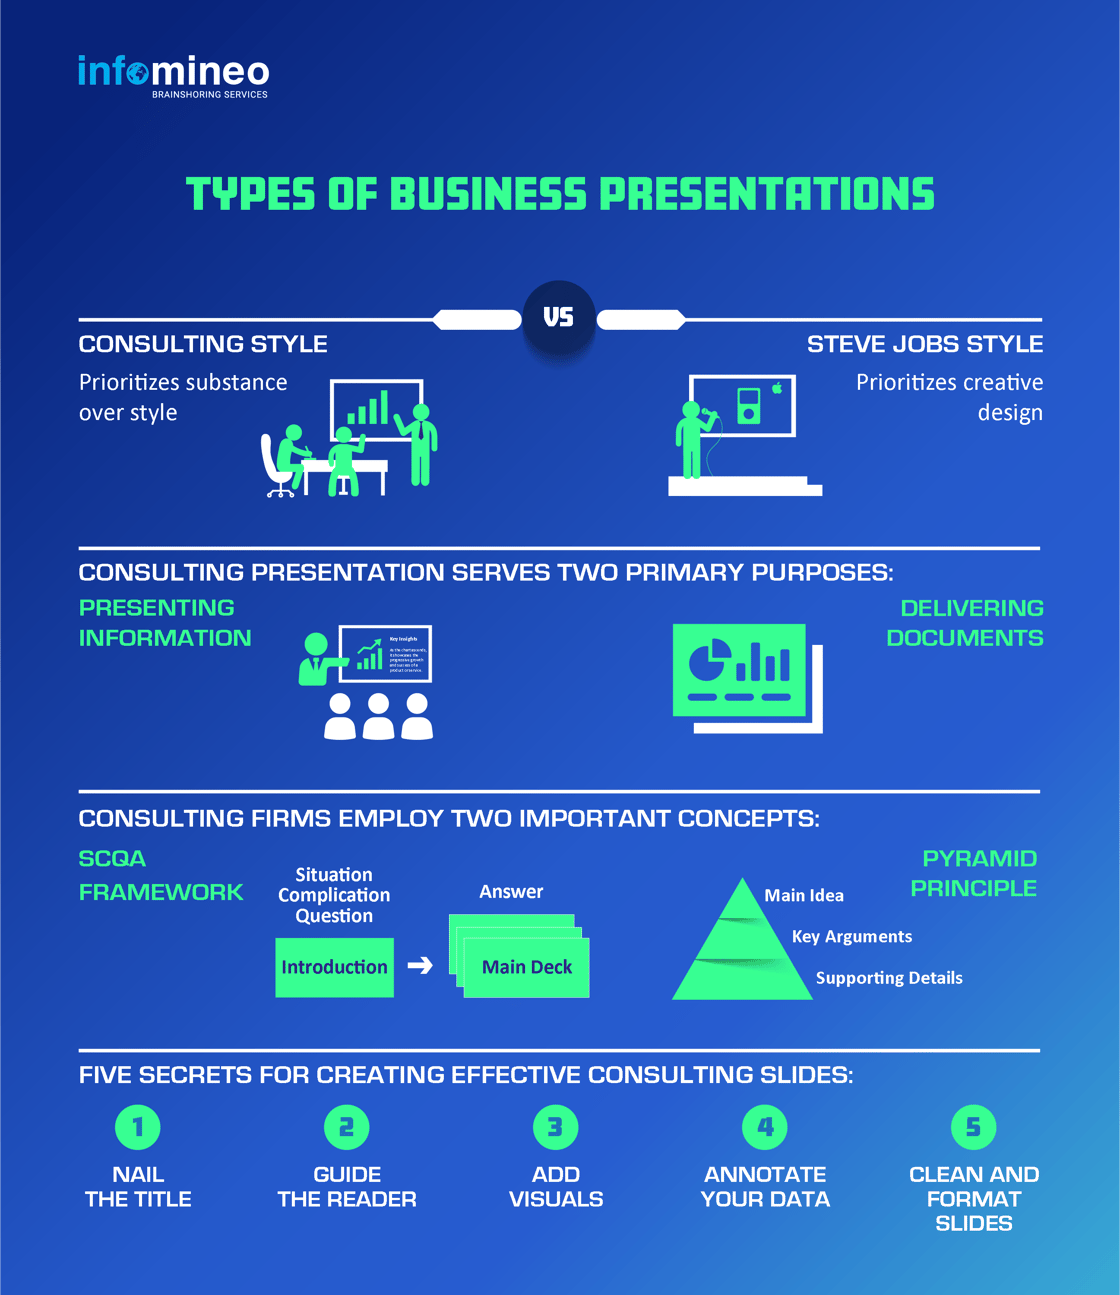 Types of Business Presentations 